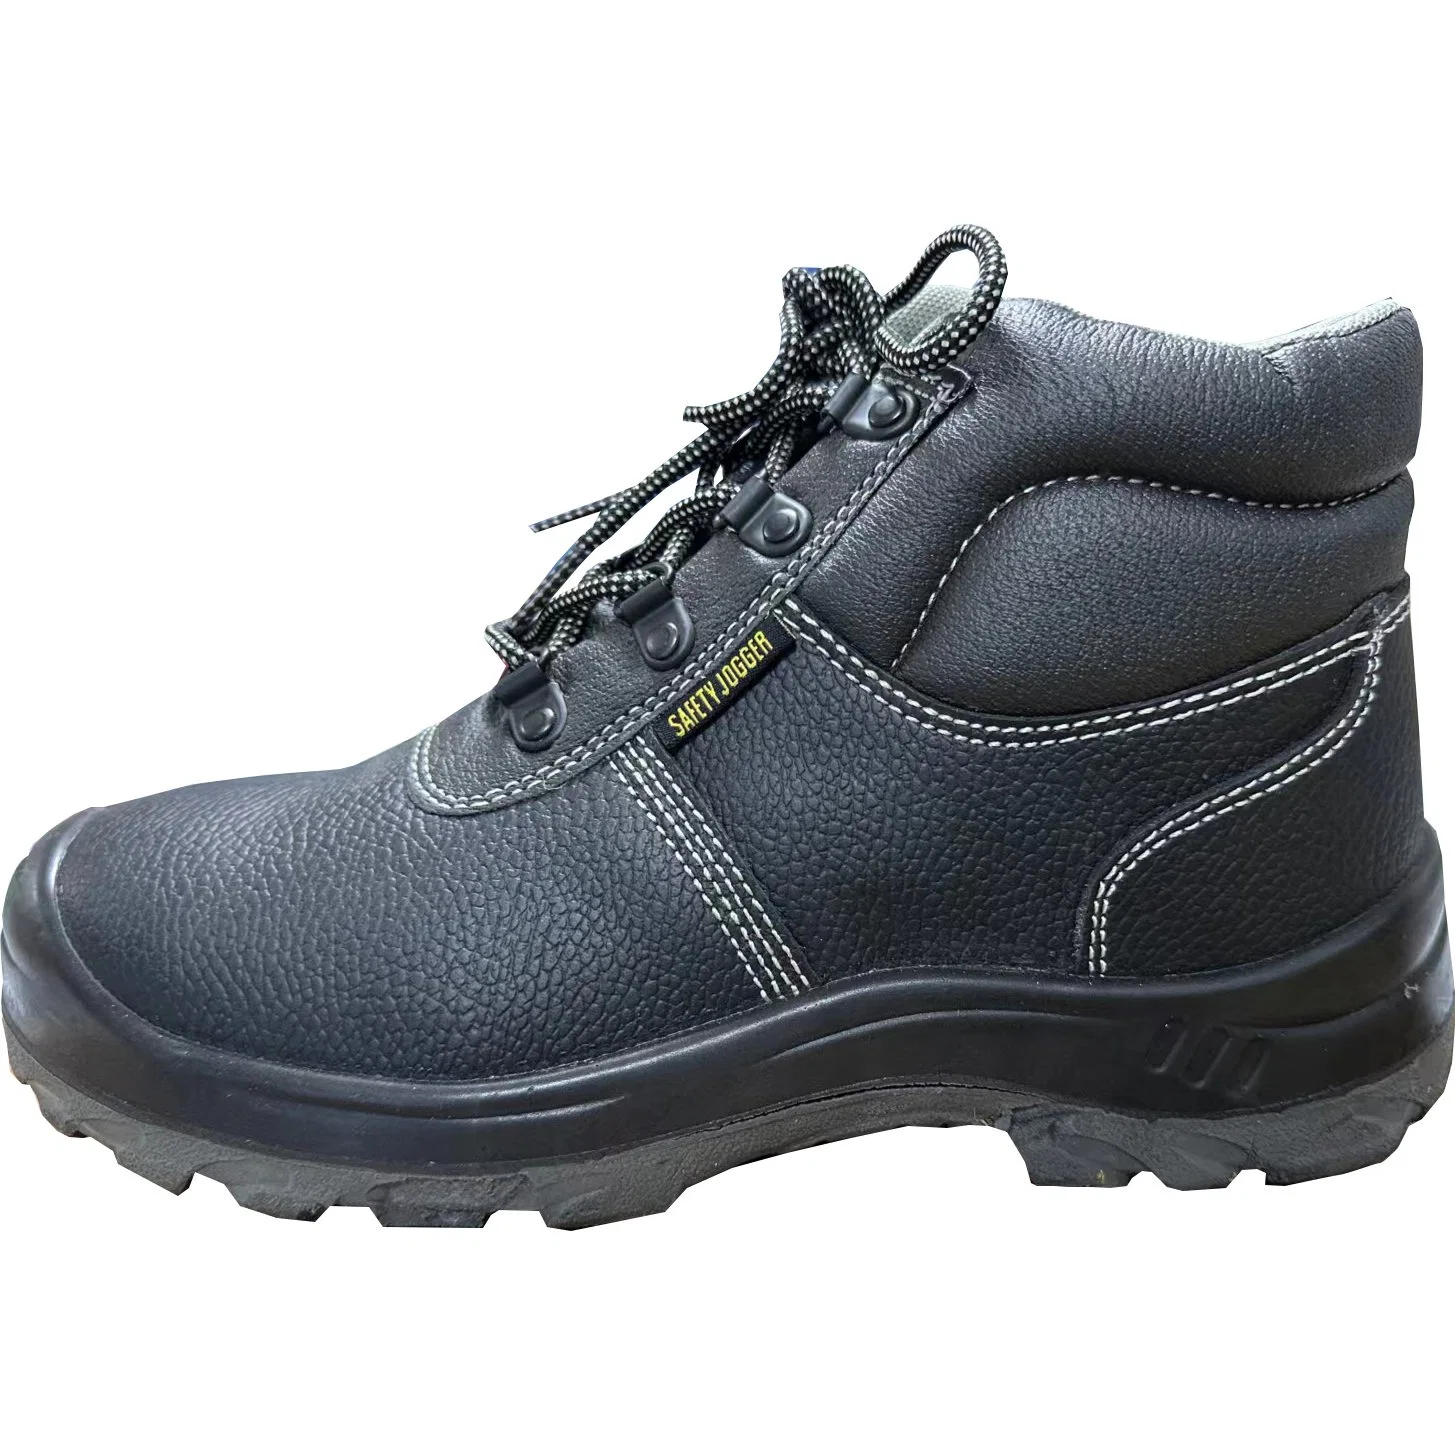 SLS-Gk007 Injection Molding Buffalo Leather Safety Shoes for Men